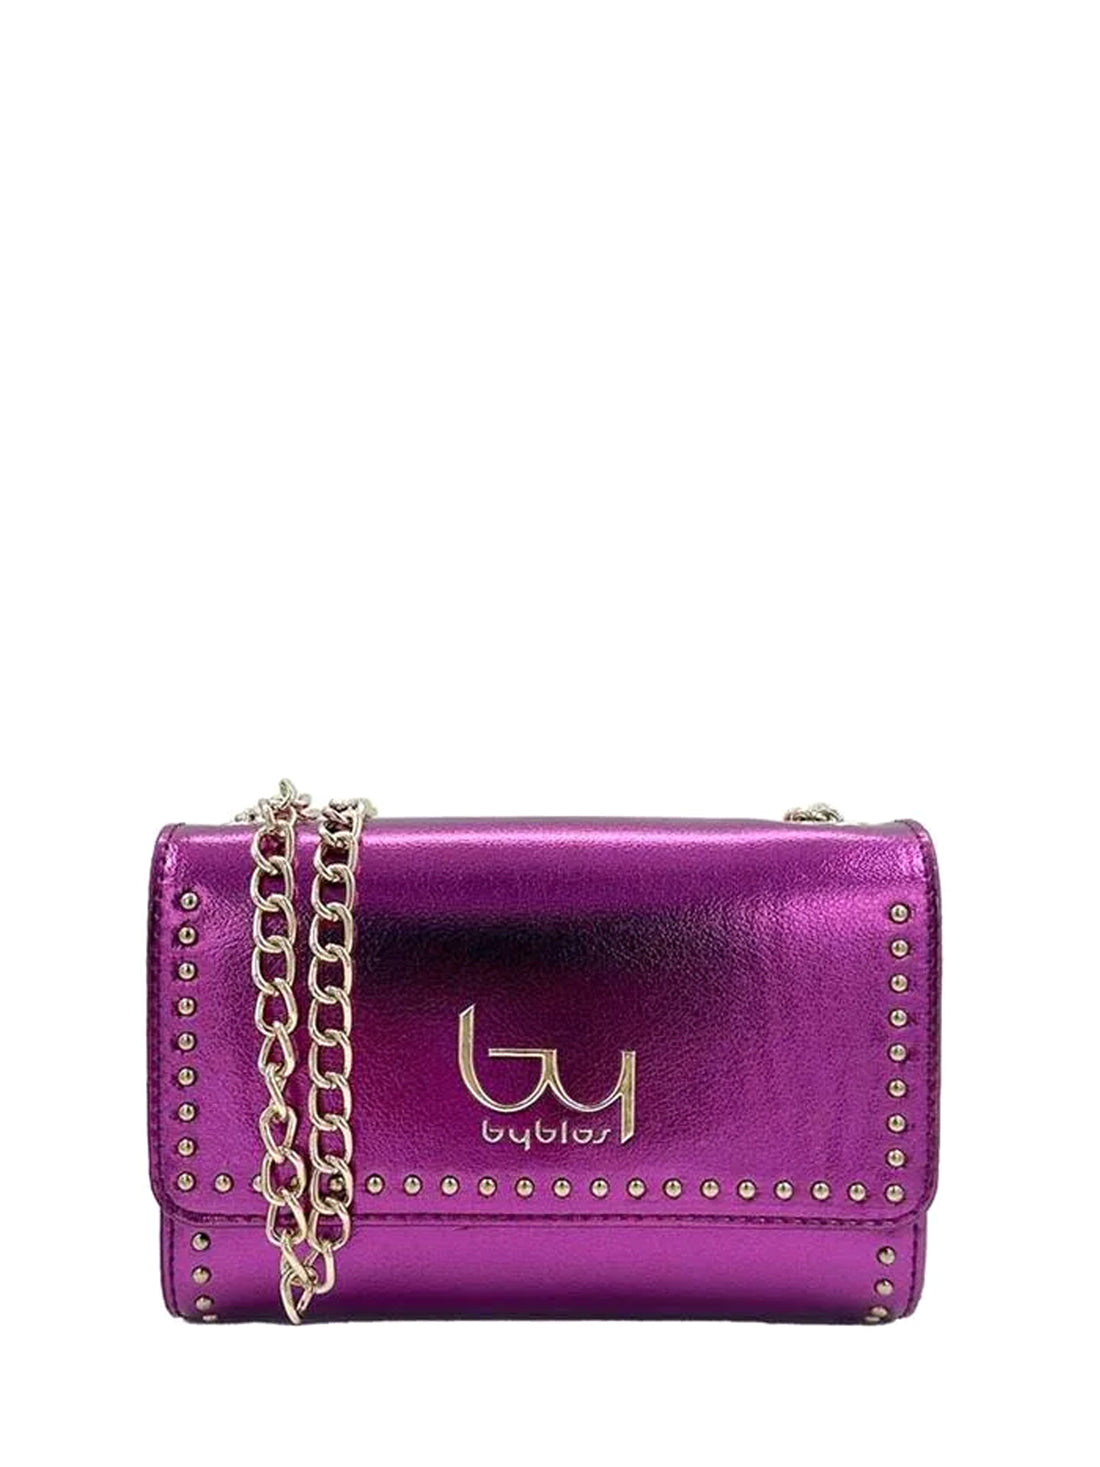 Tracolla Fucsia By Byblos